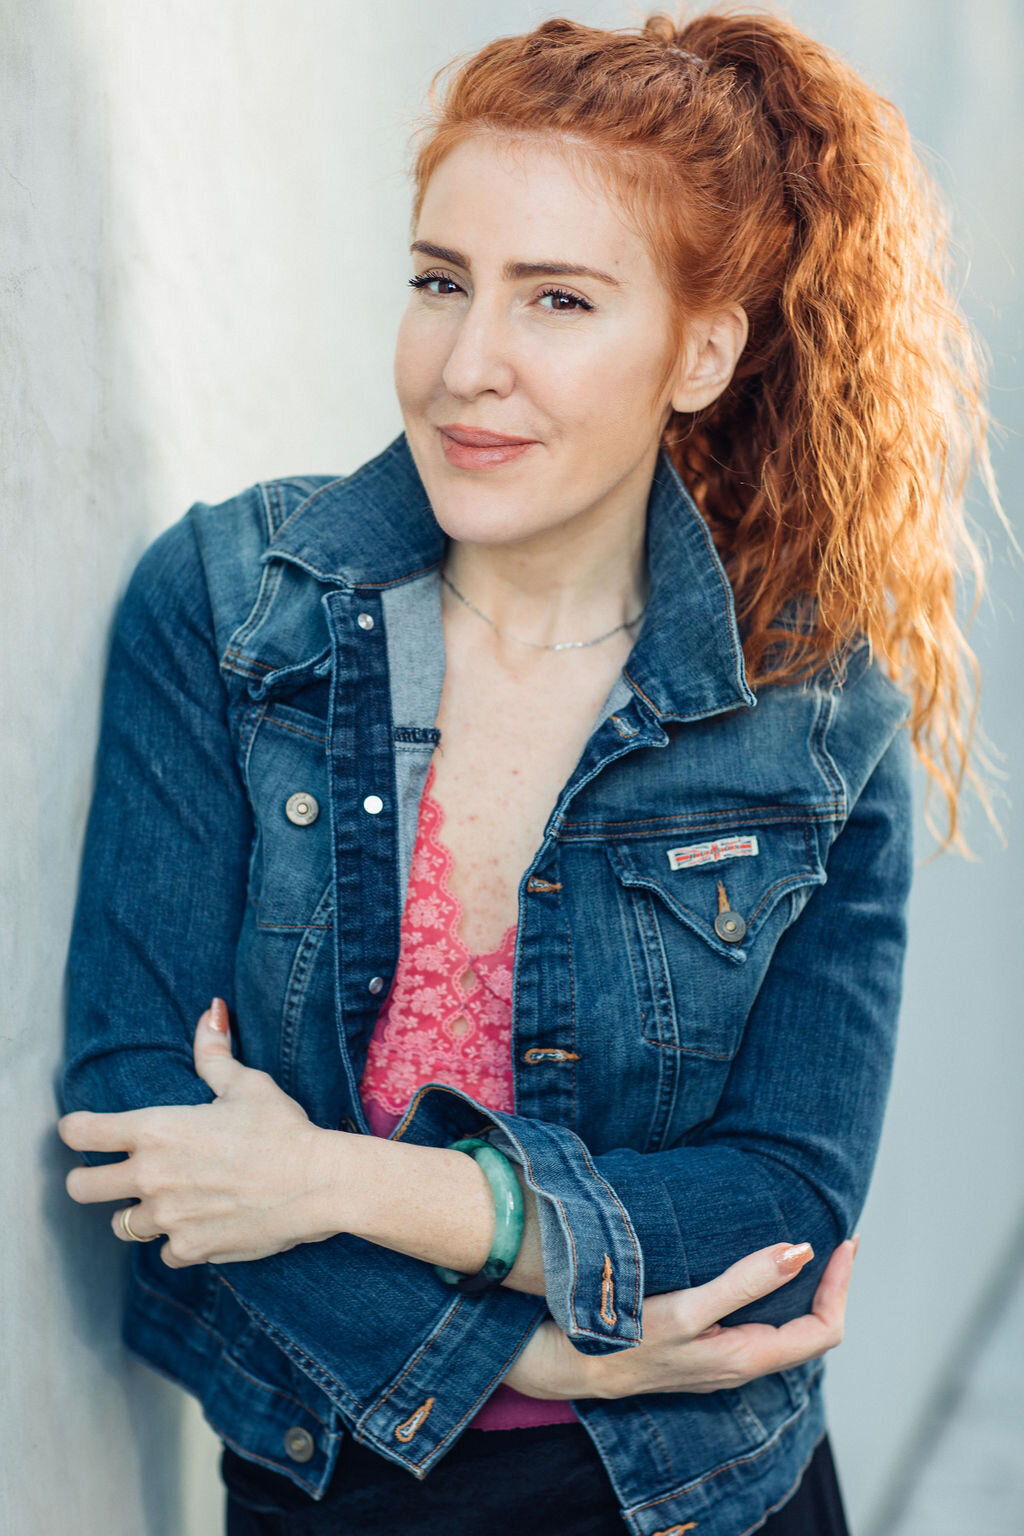 Headshot Photograph Of Woman In Blue Denim Jacket And Inner Pink Blouse Los Angeles